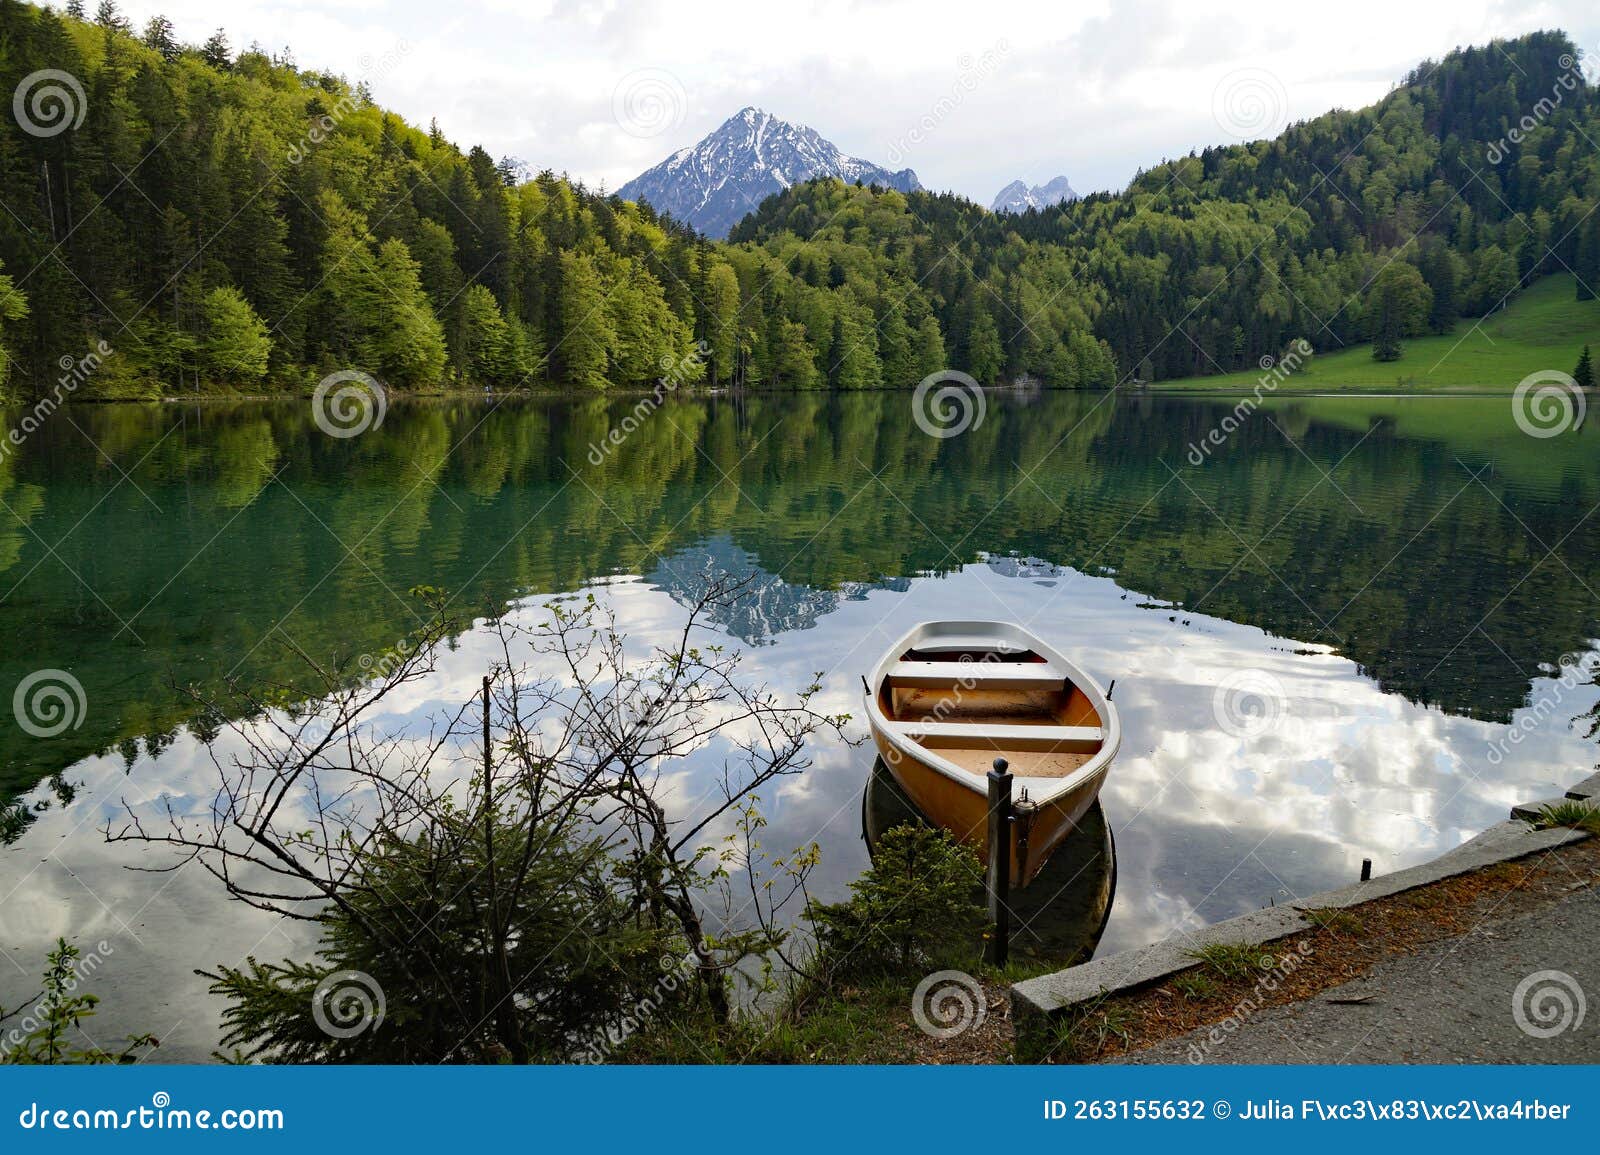 Alpine Lake Alatsee The Snowy Bavarian Alps And Spring Forest